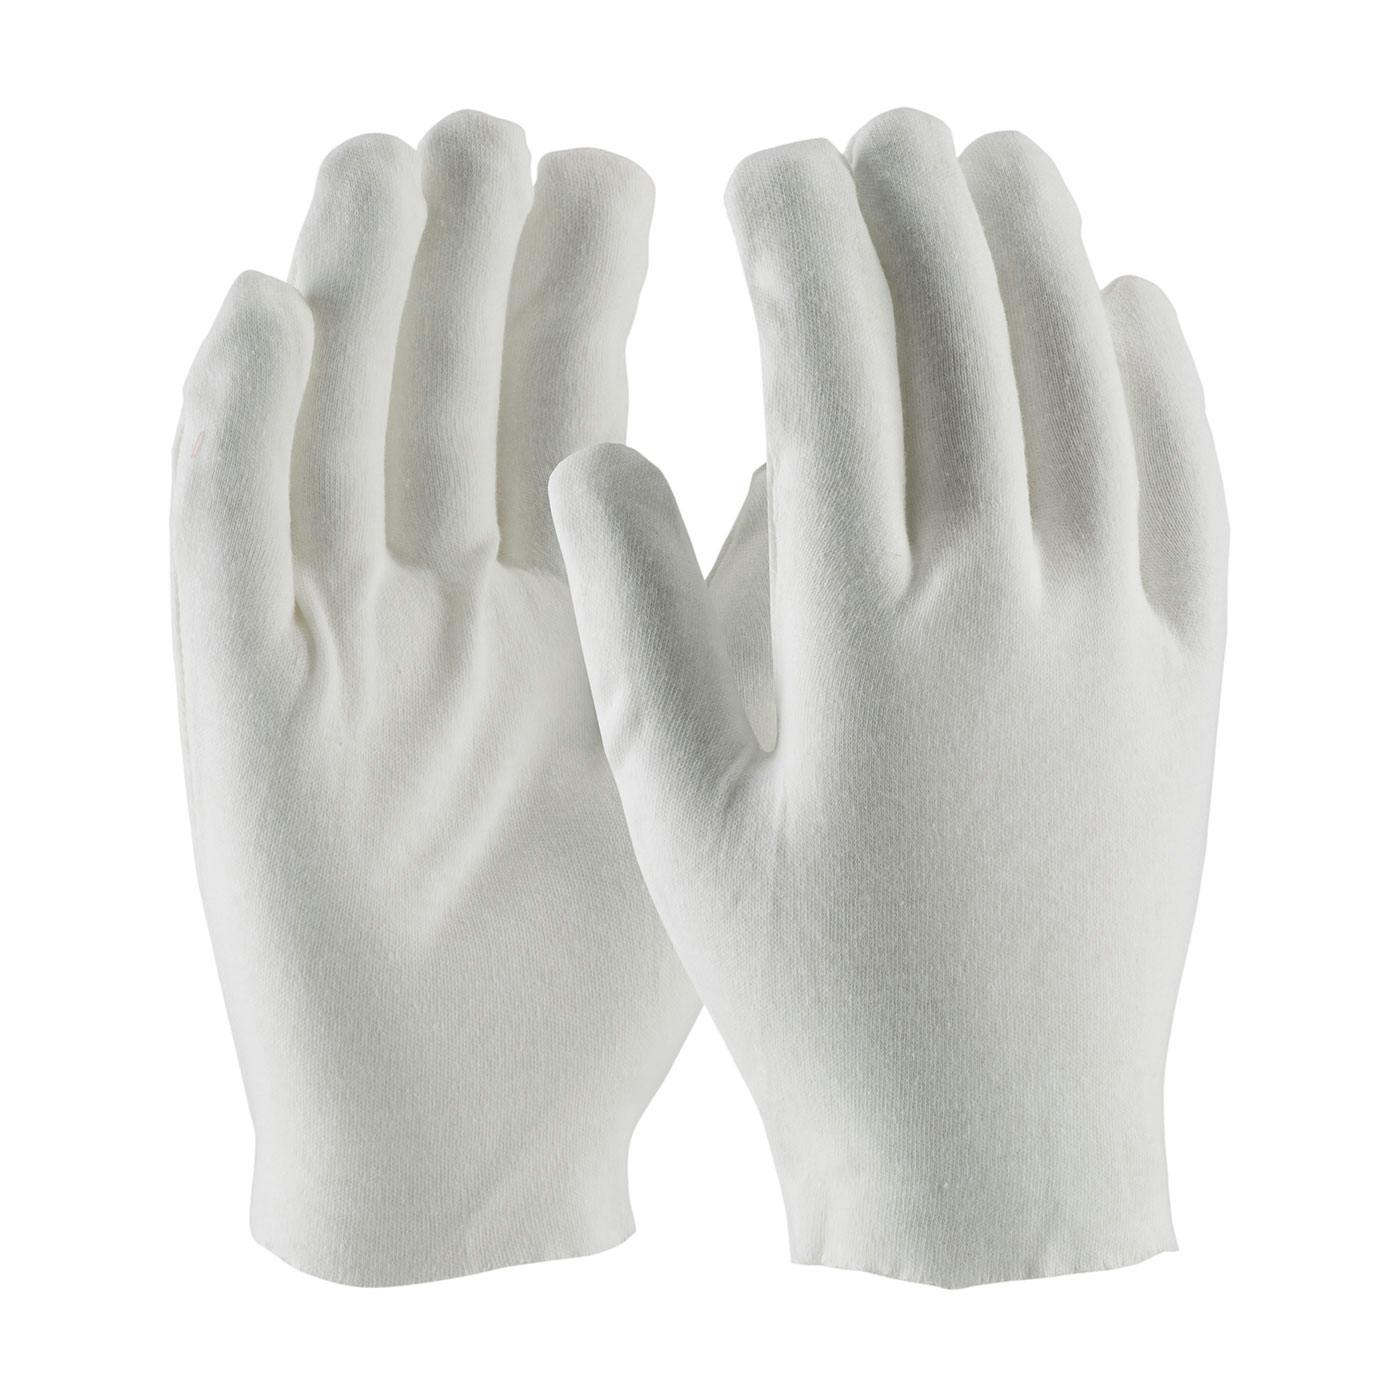 Heavy Weight Cotton Lisle Inspection Glove with Unhemmed Cuff - Men's, White (97-540) - MENS